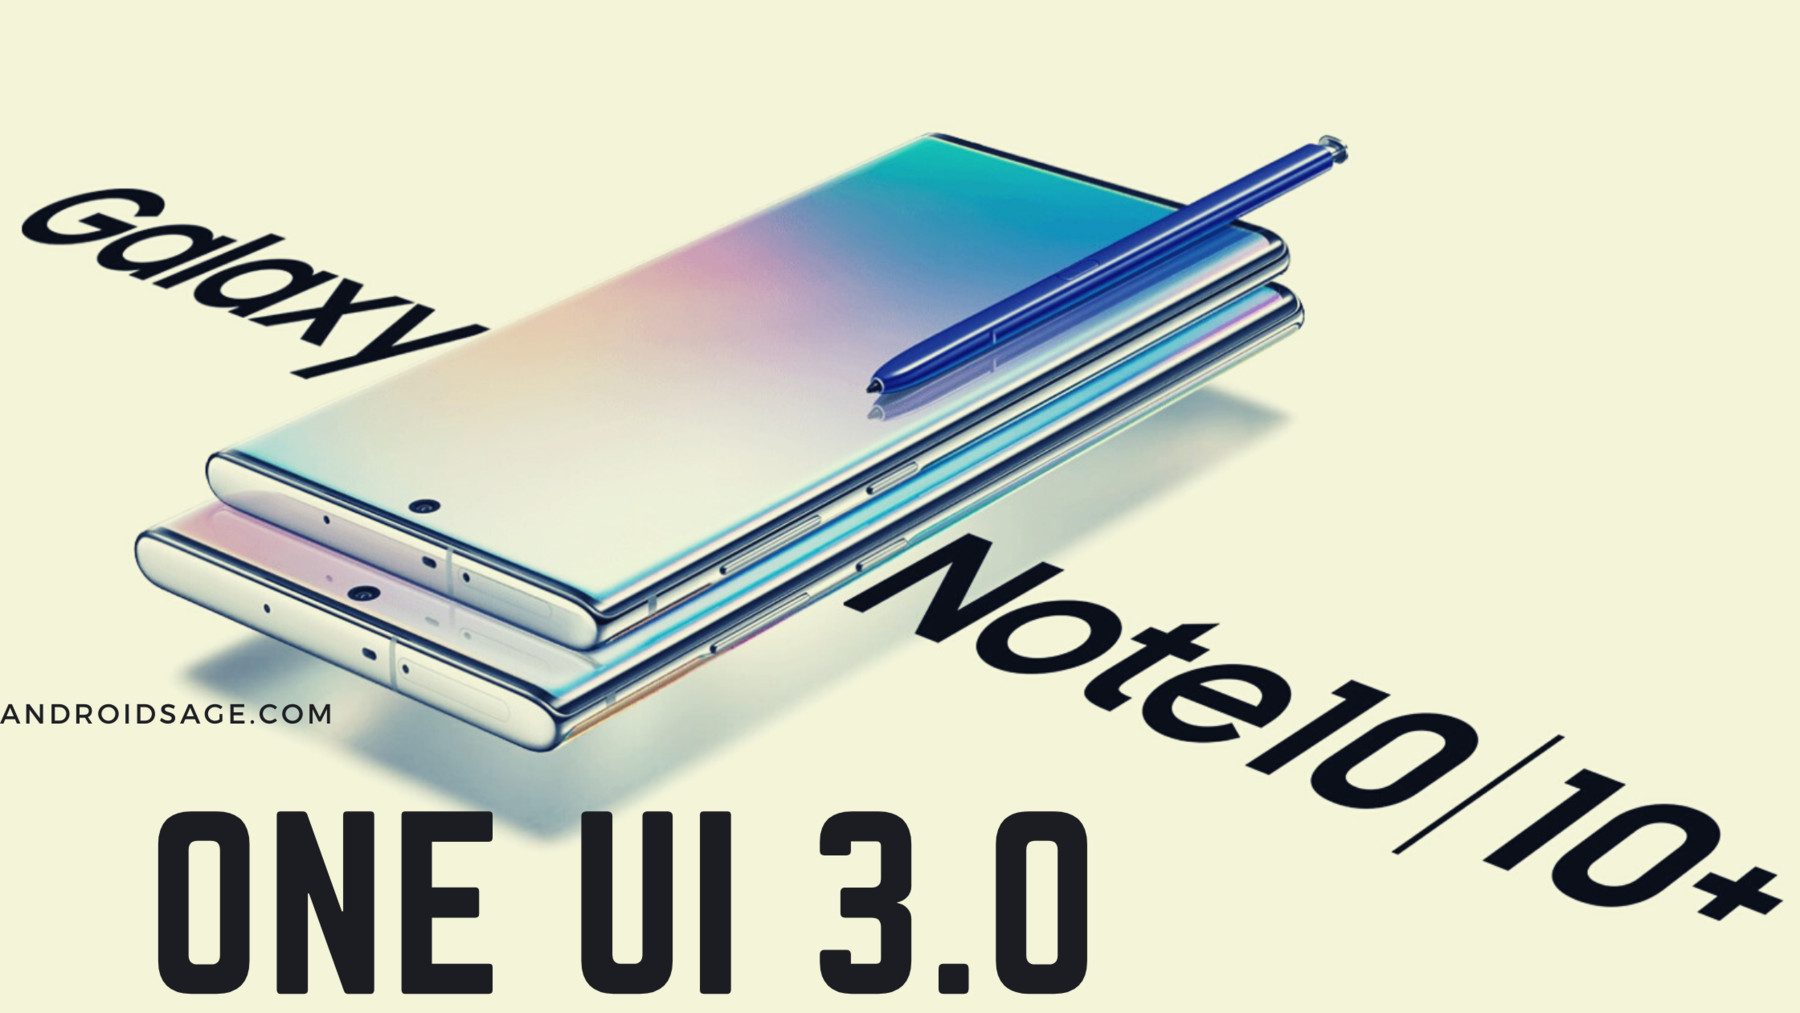 One UI 3.0 for Galaxy Note 10 plus